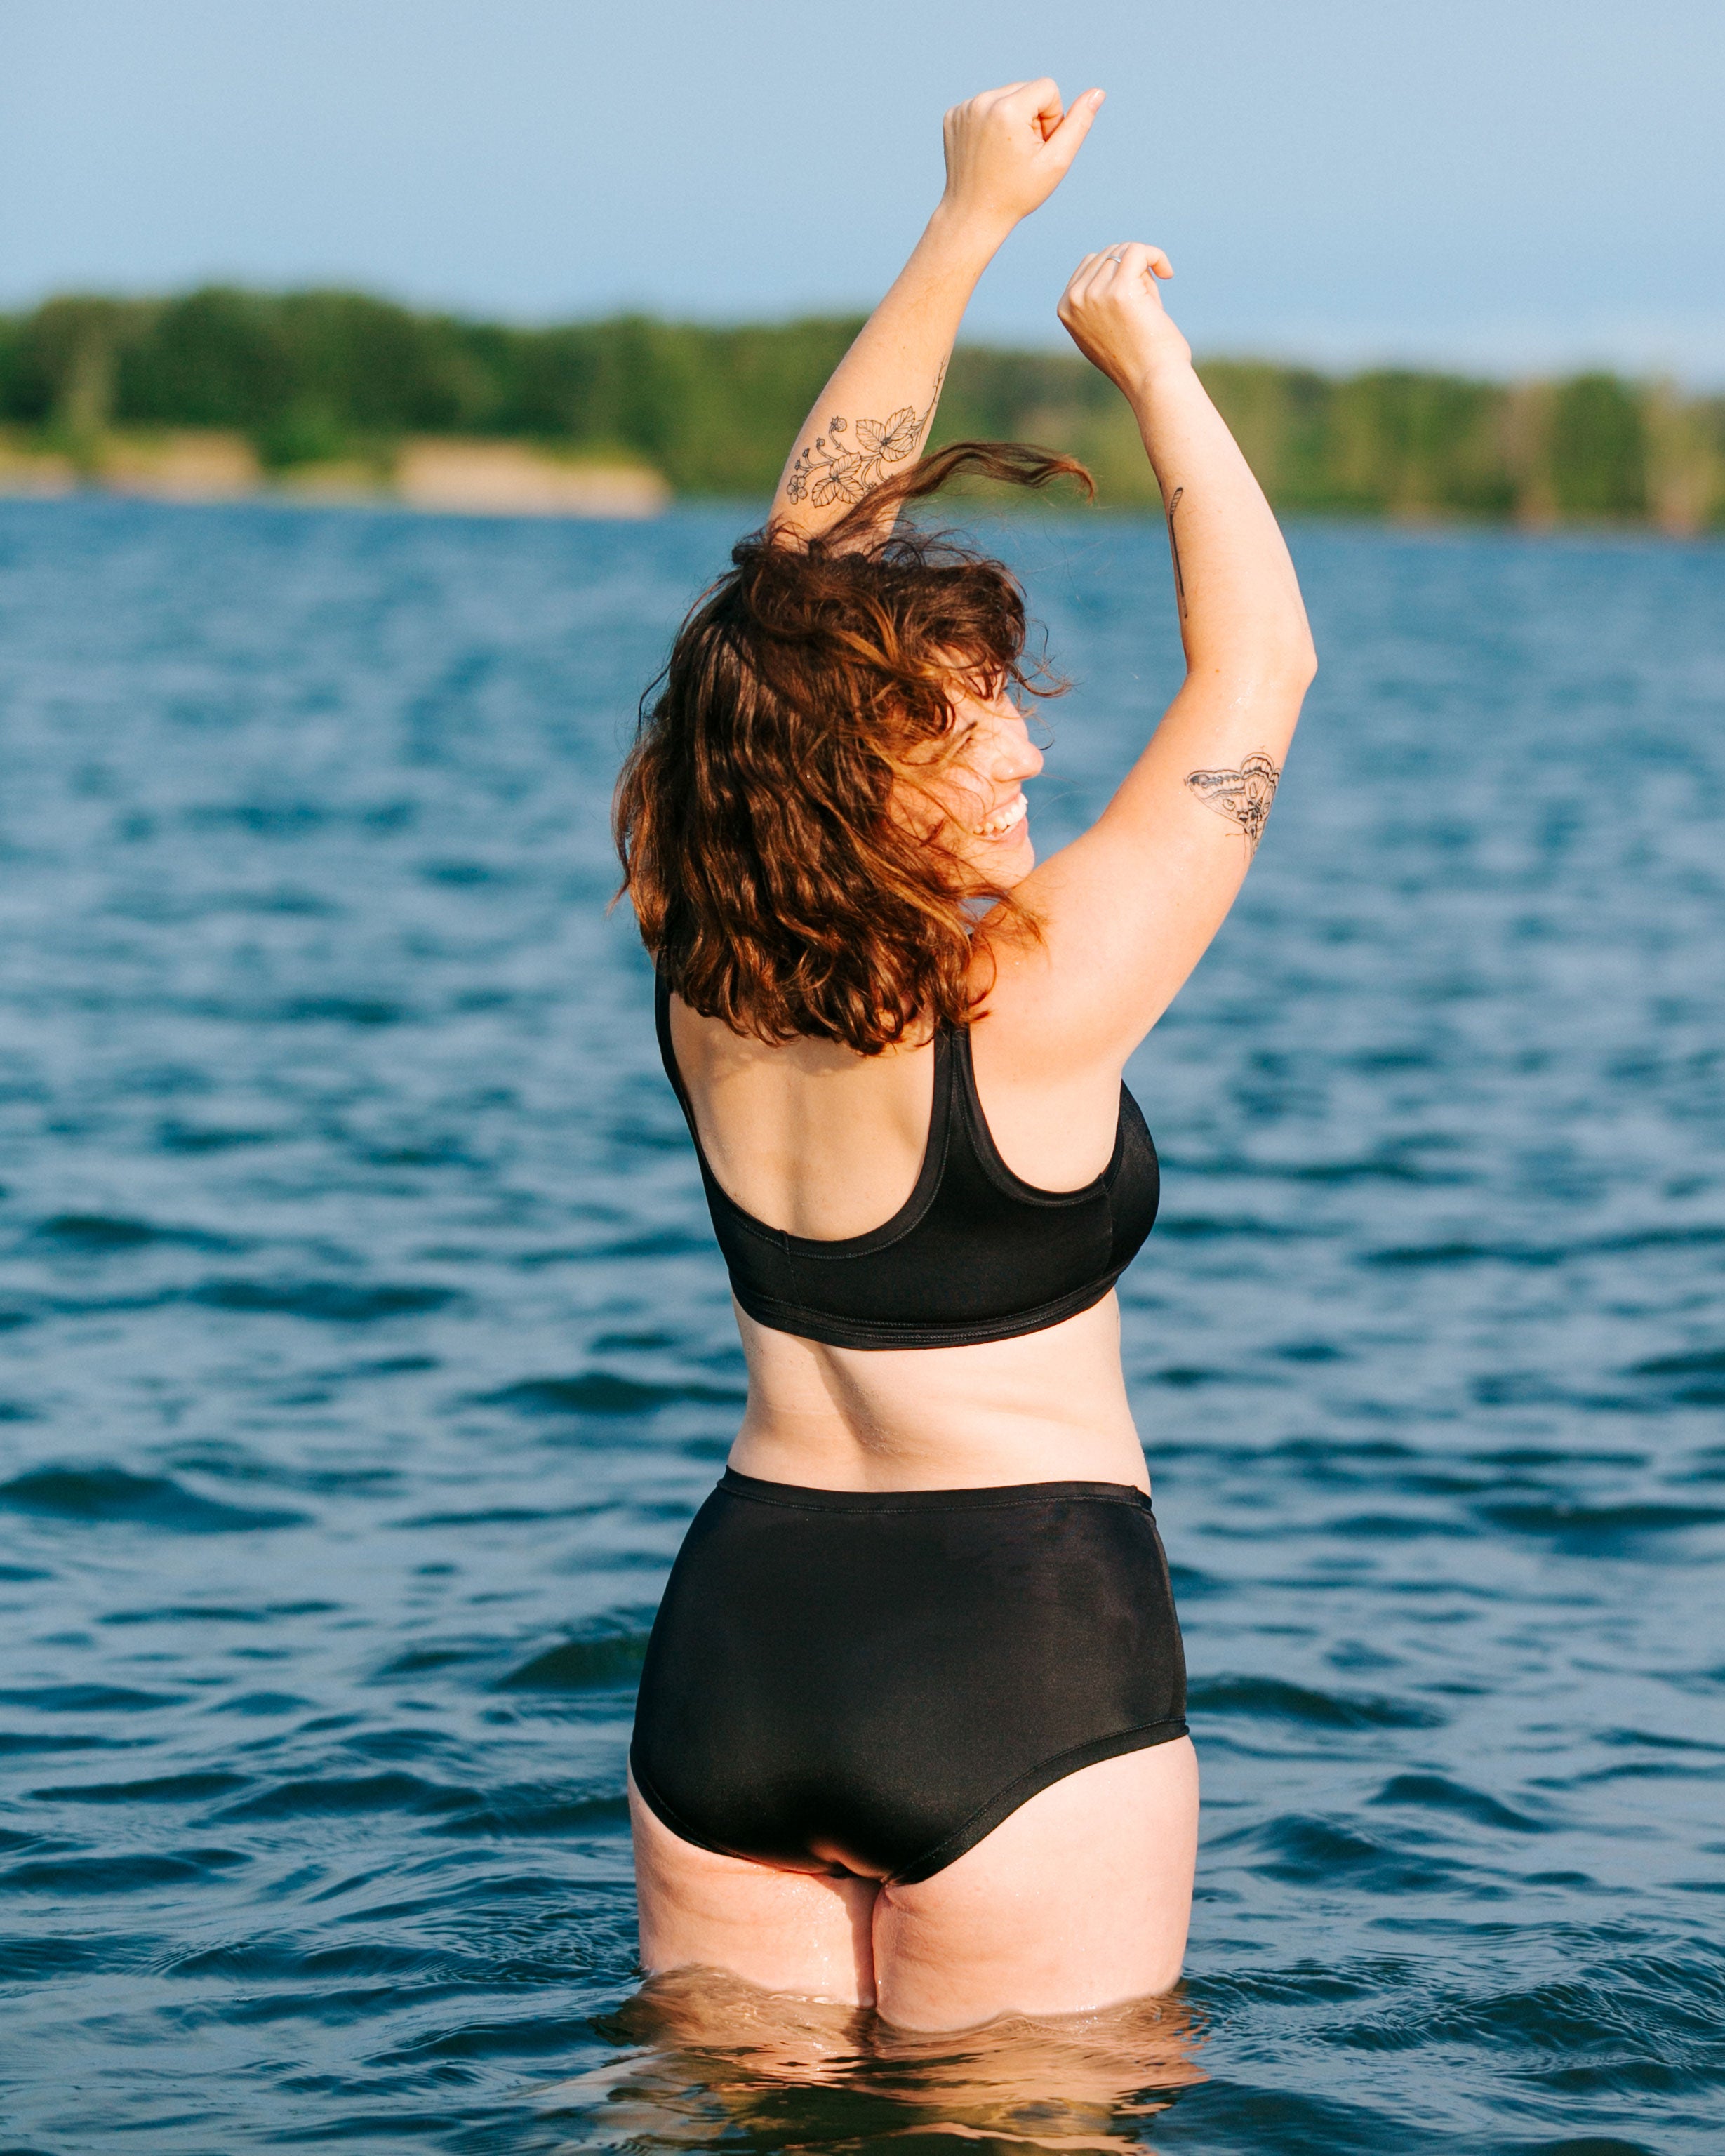 Model standing with back to us in the water wearing Thunderpants recycled nylon Original style Swimwear bottoms and Swimwear Top in Plain Black.